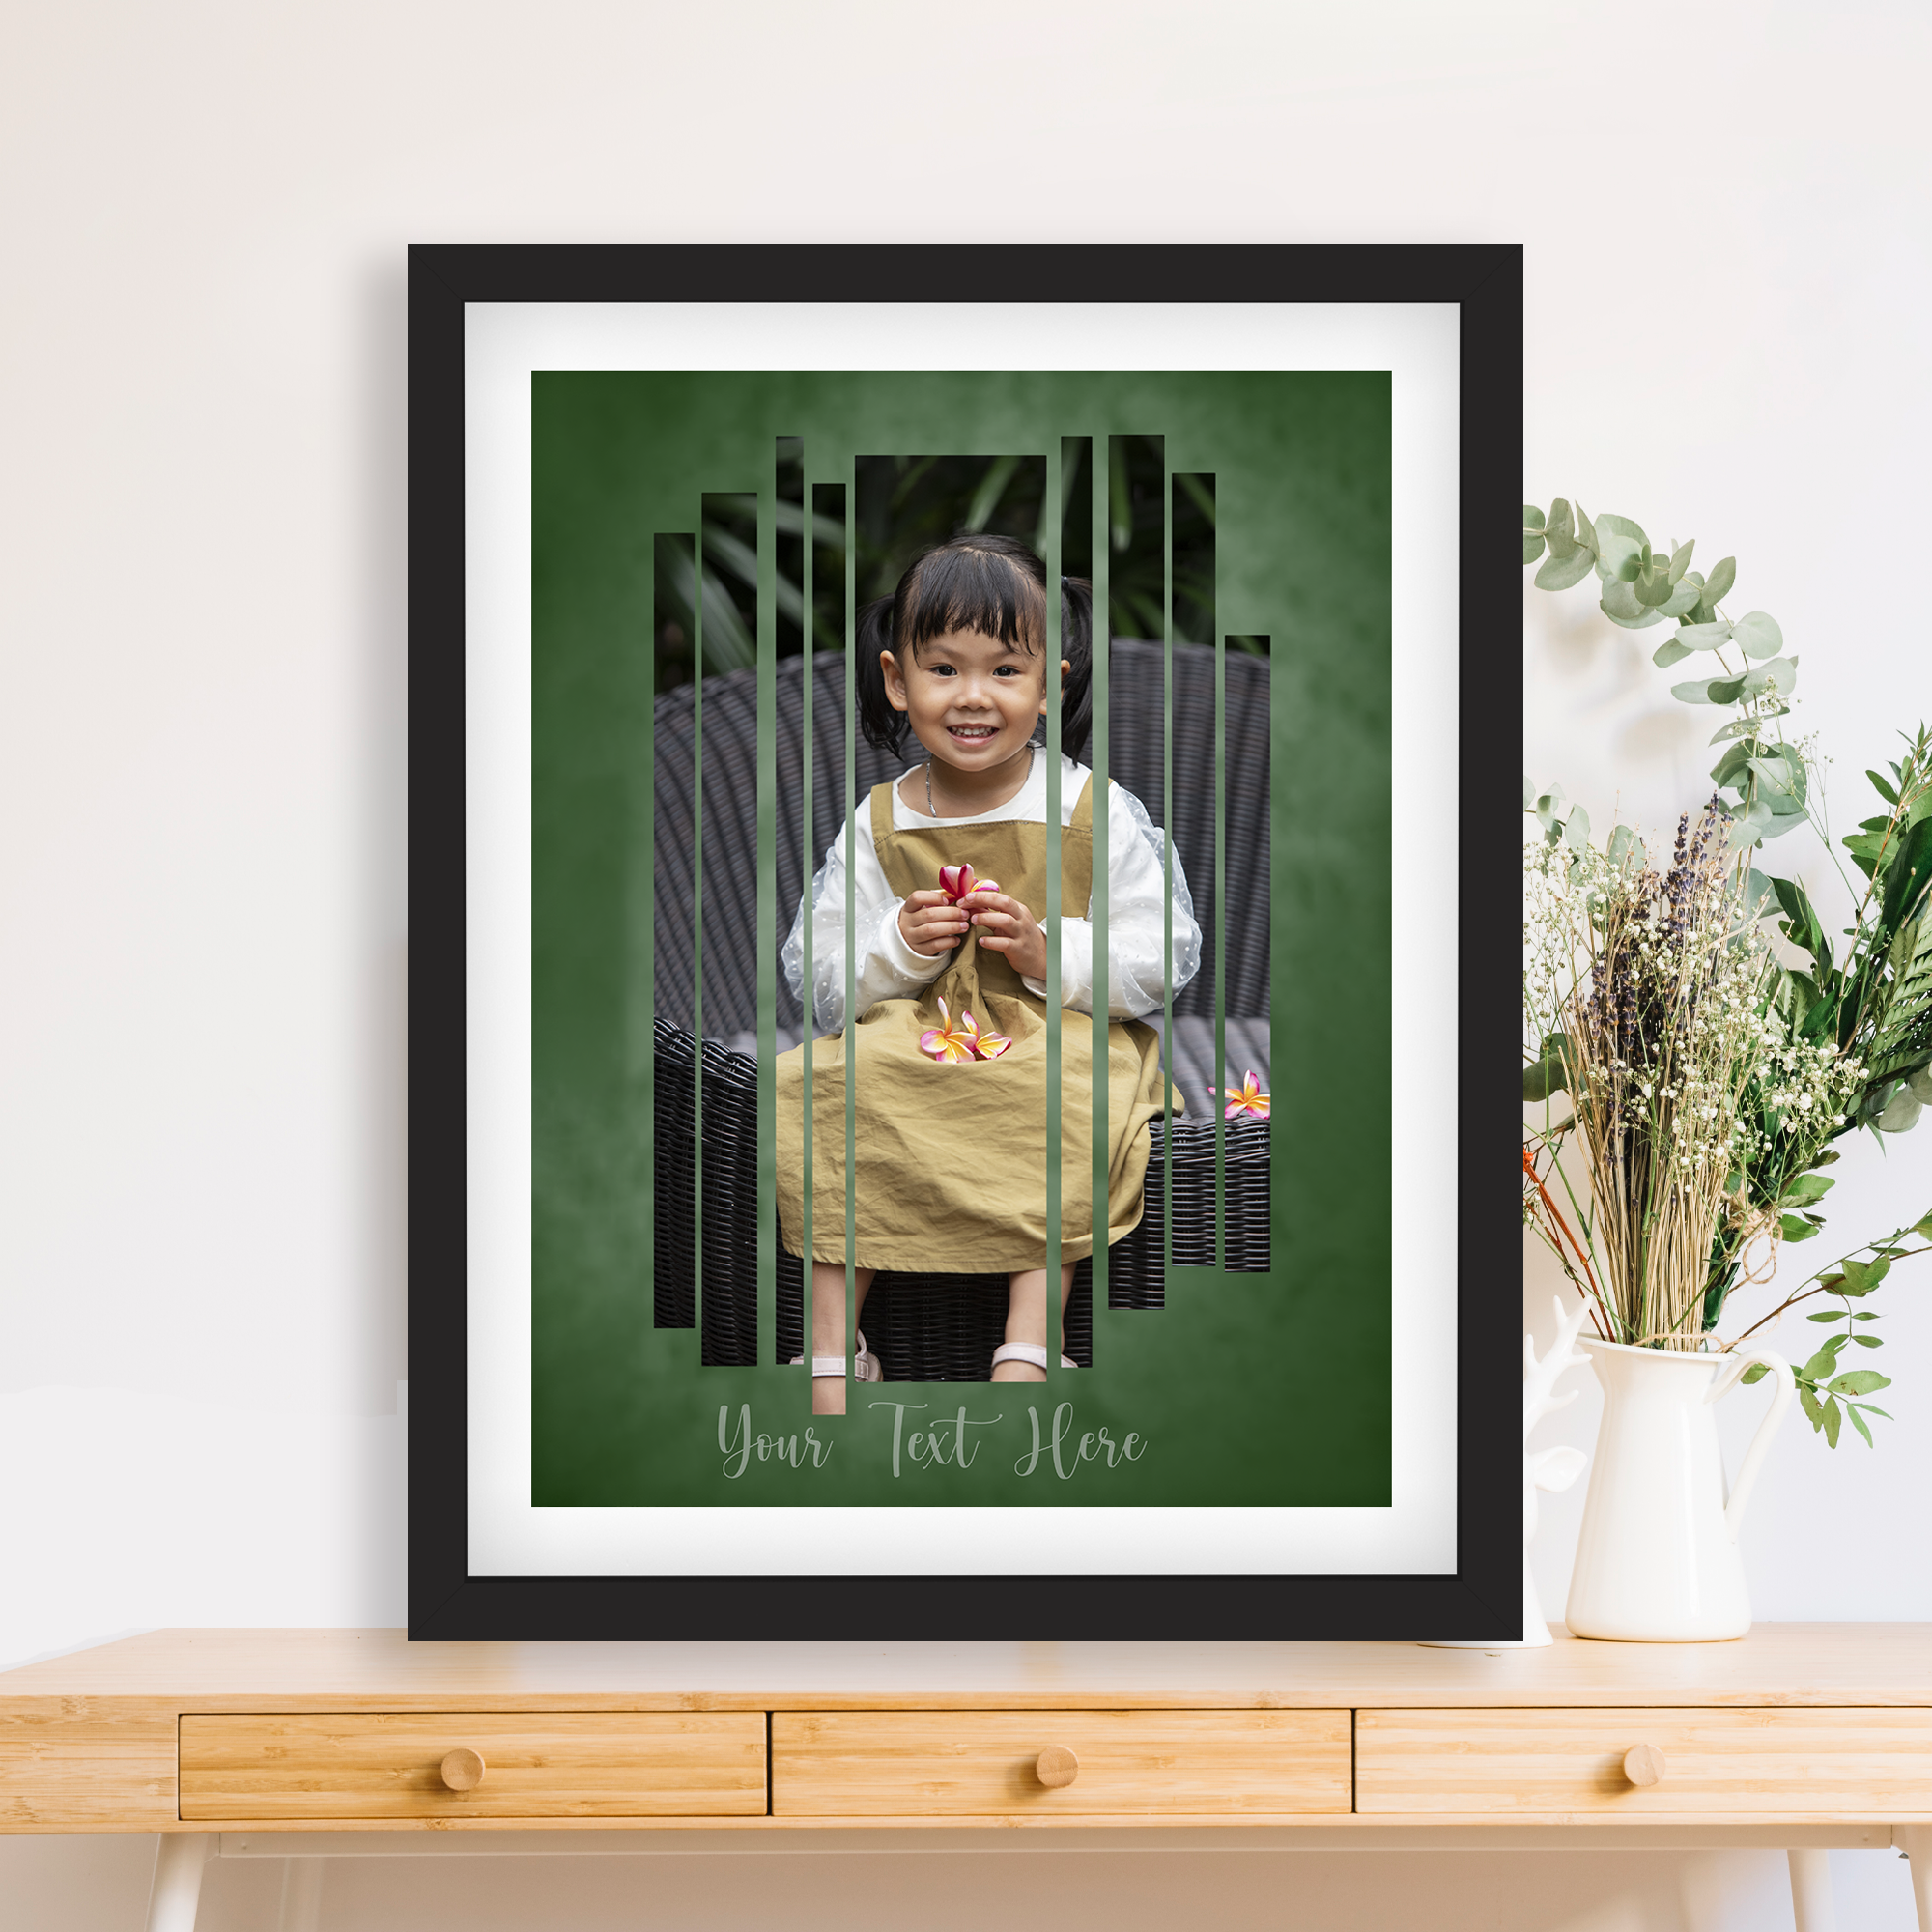 Green Bars Effect Personalized Poster